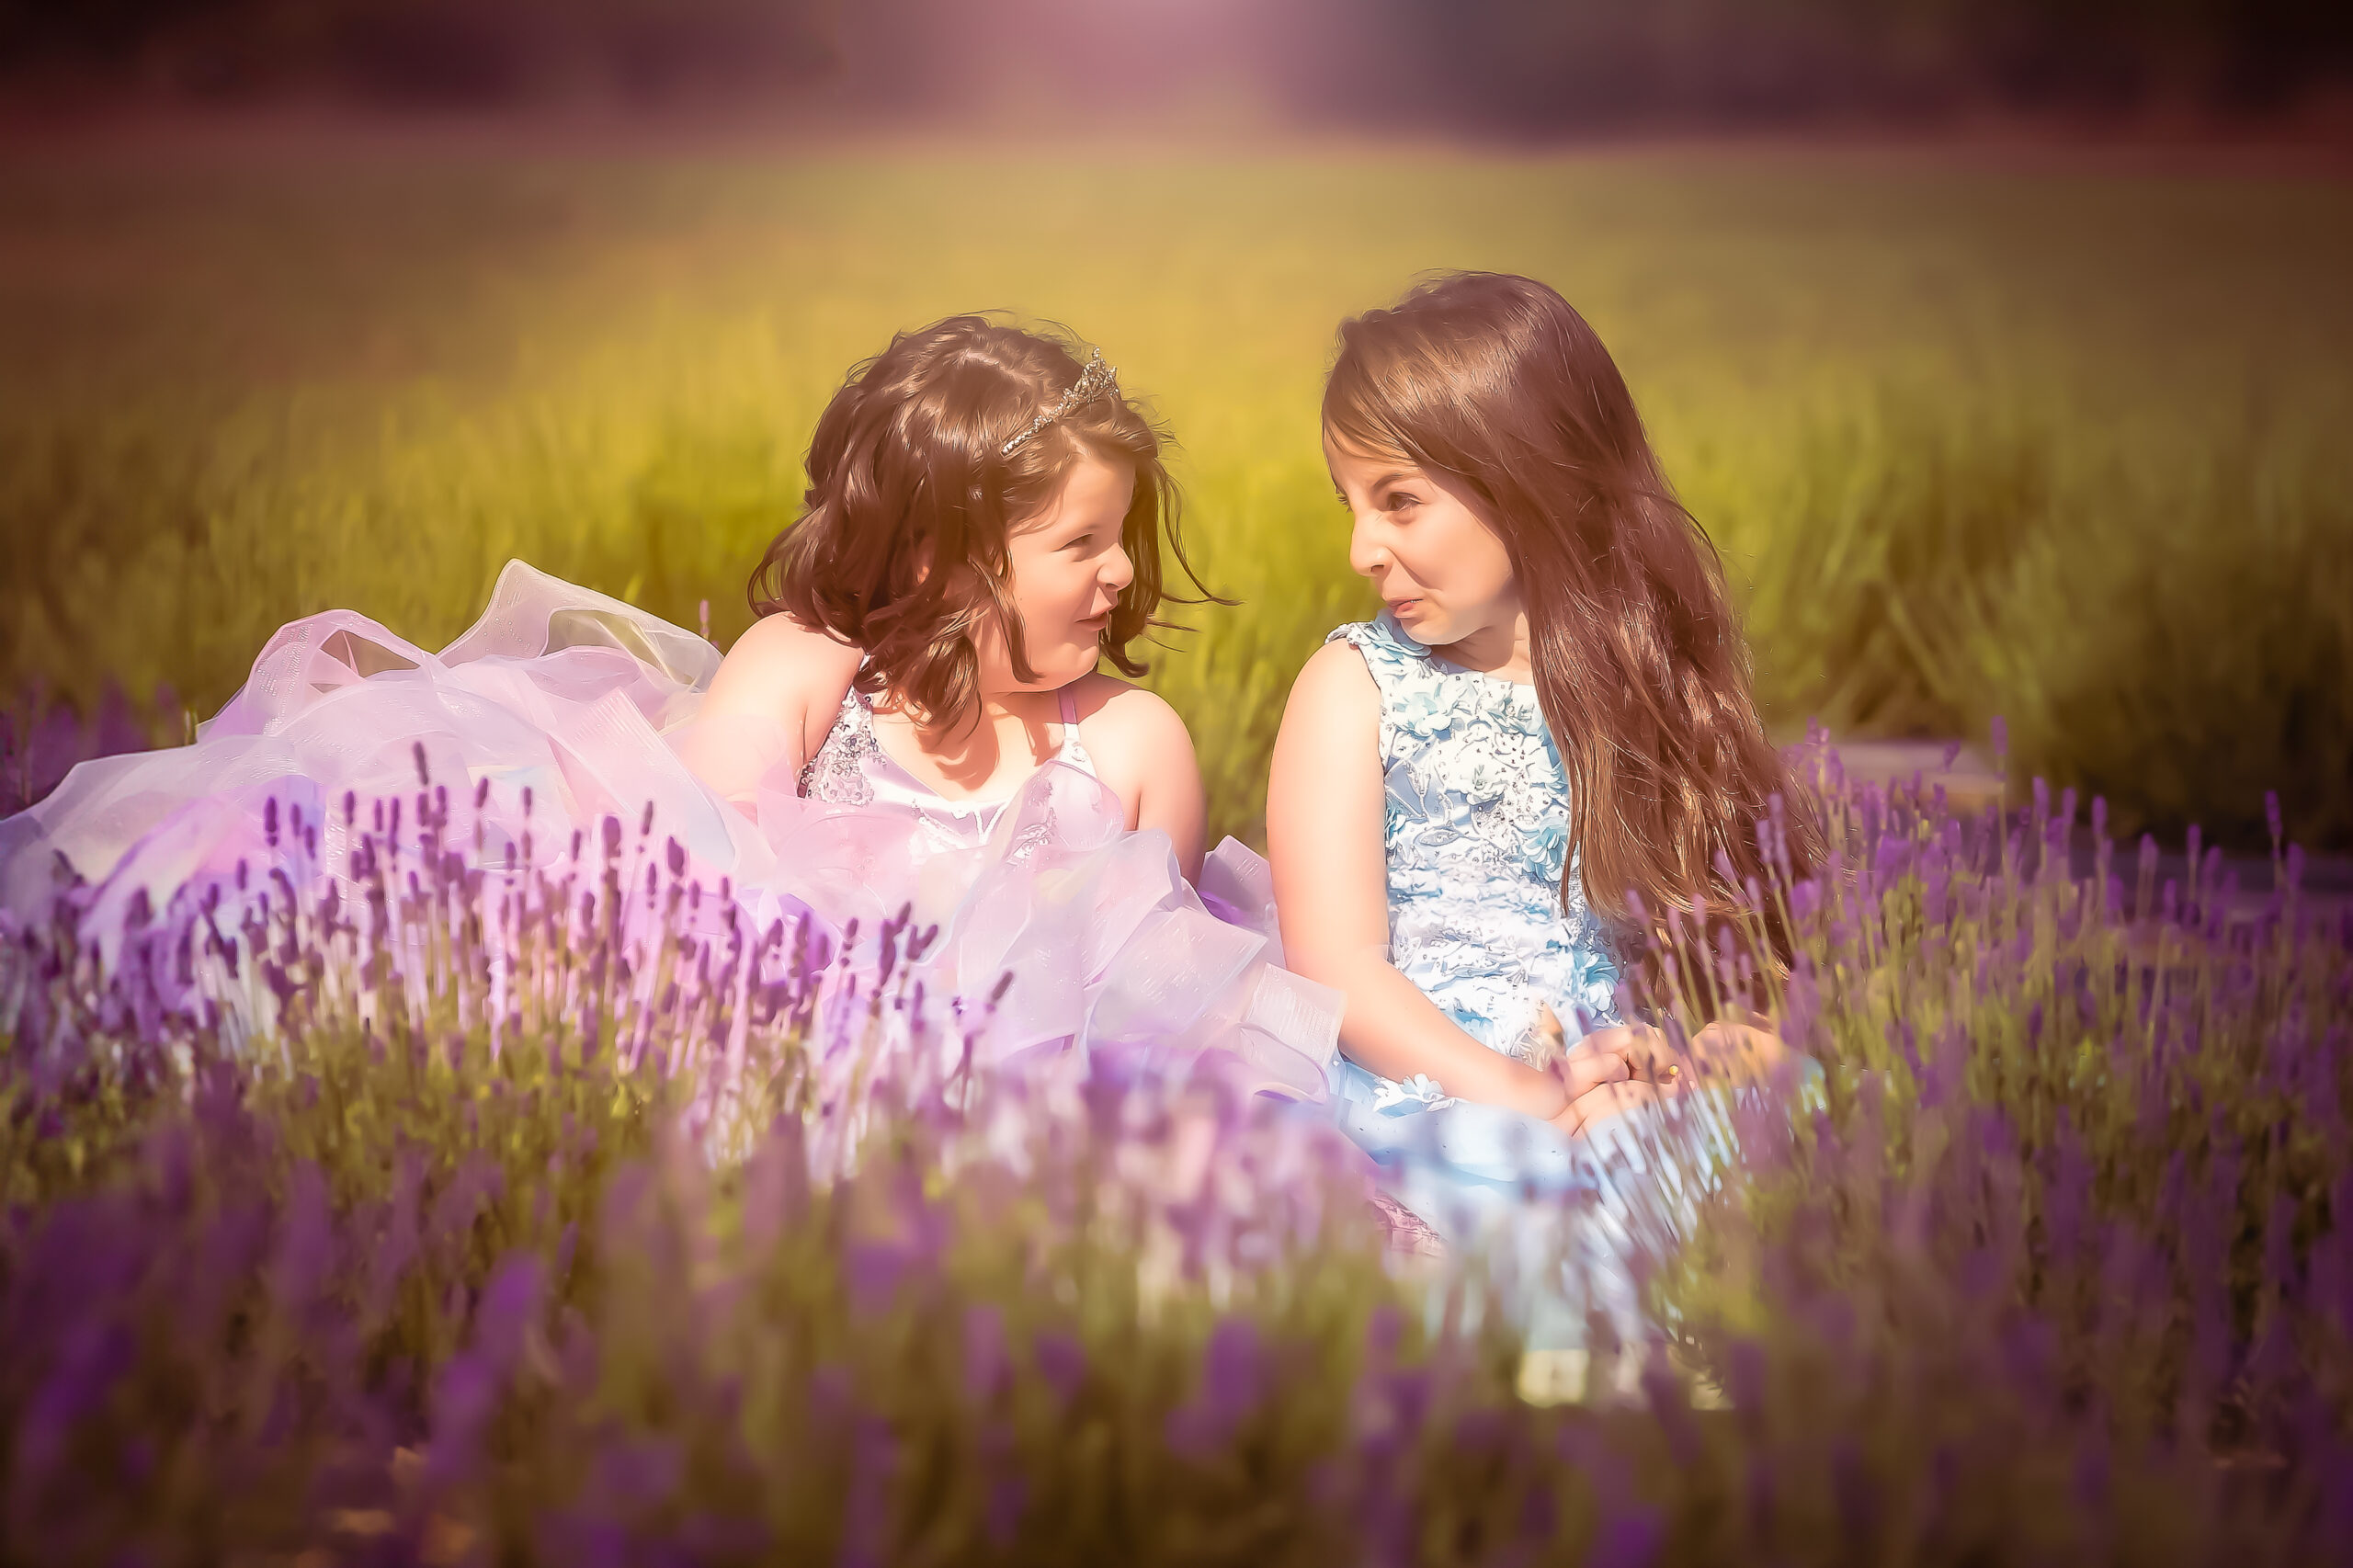 Two girls in princess gowns making funny faces in lavender fields.